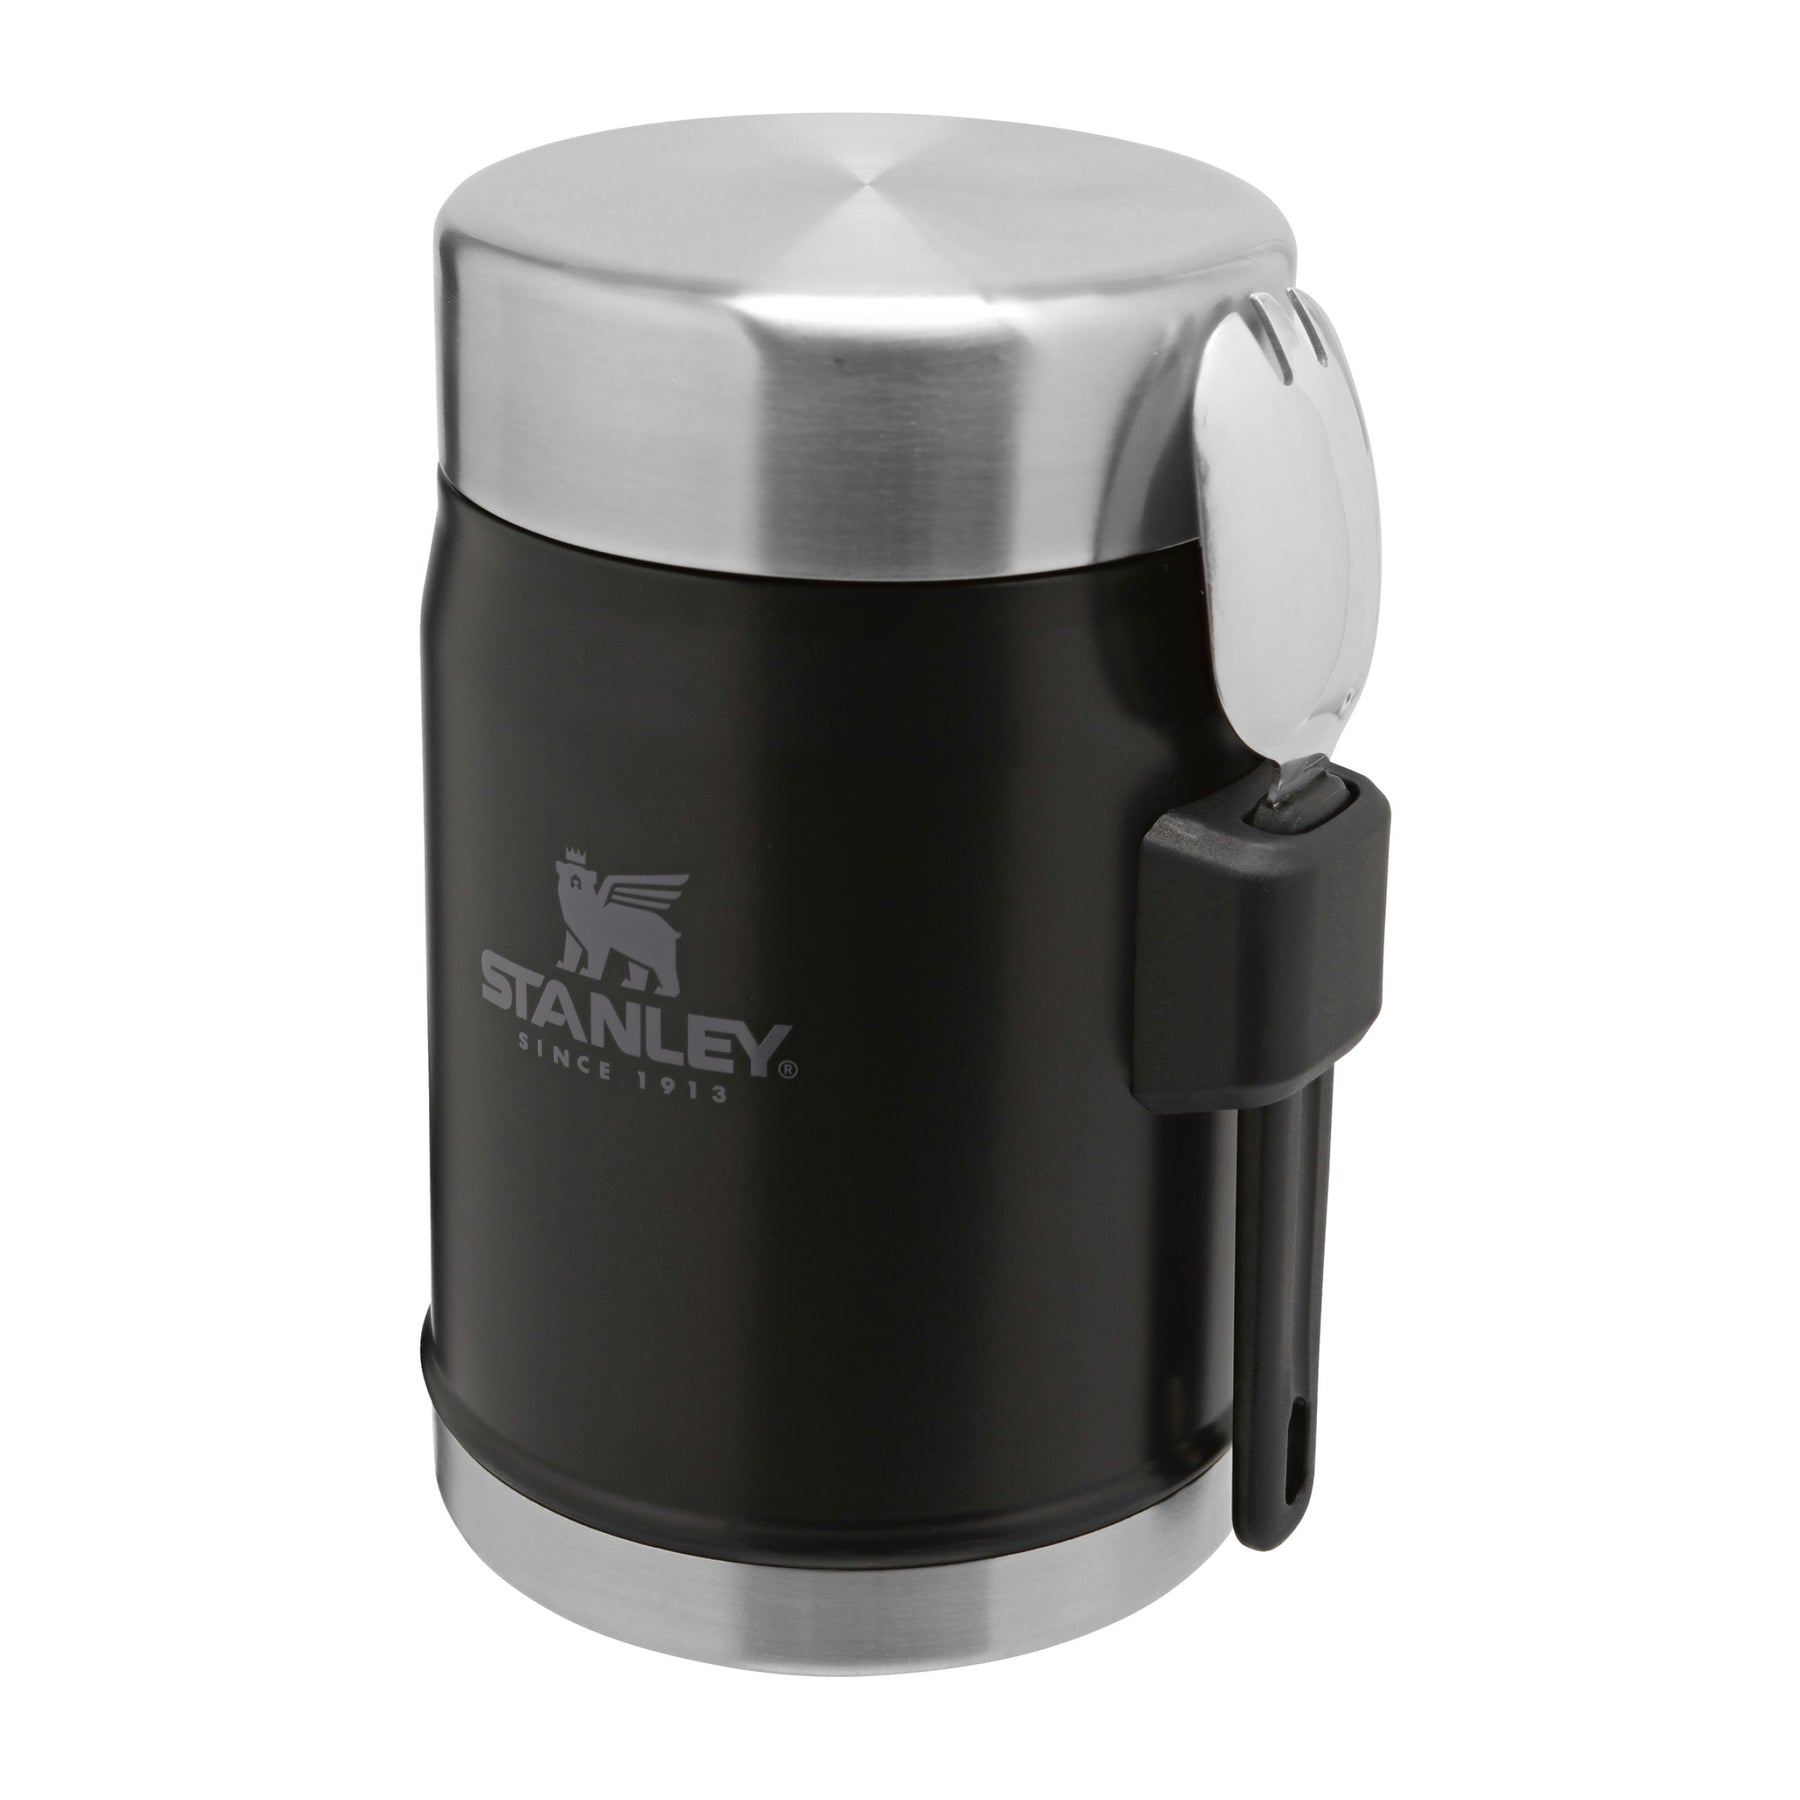 Thermos vs. Stanley Insulated Food Jar 